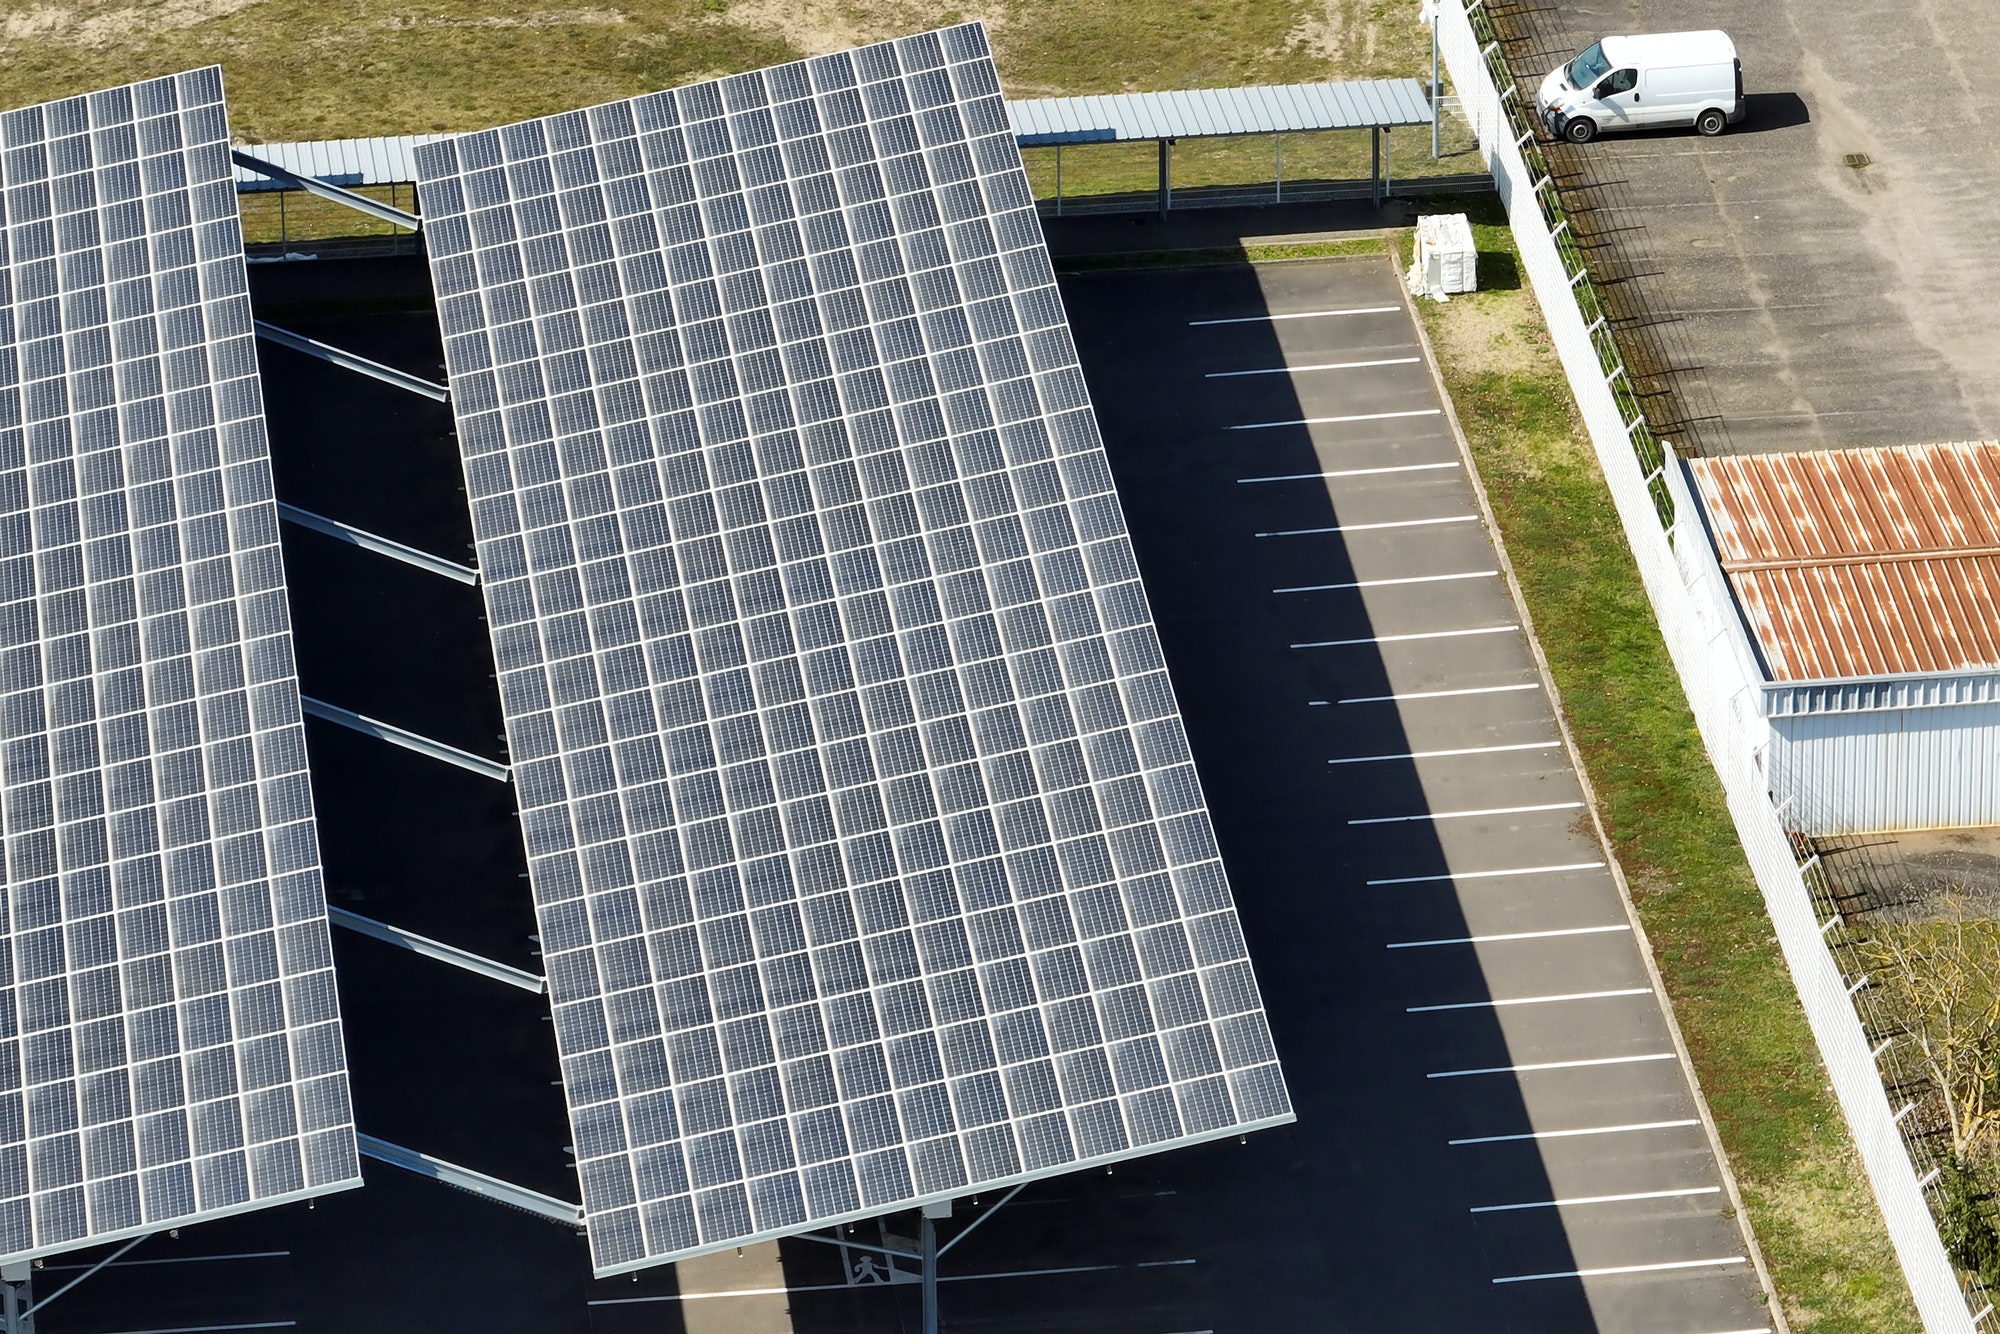 Aerial view of solar panels installed over parking lot with parked cars for effective generation of